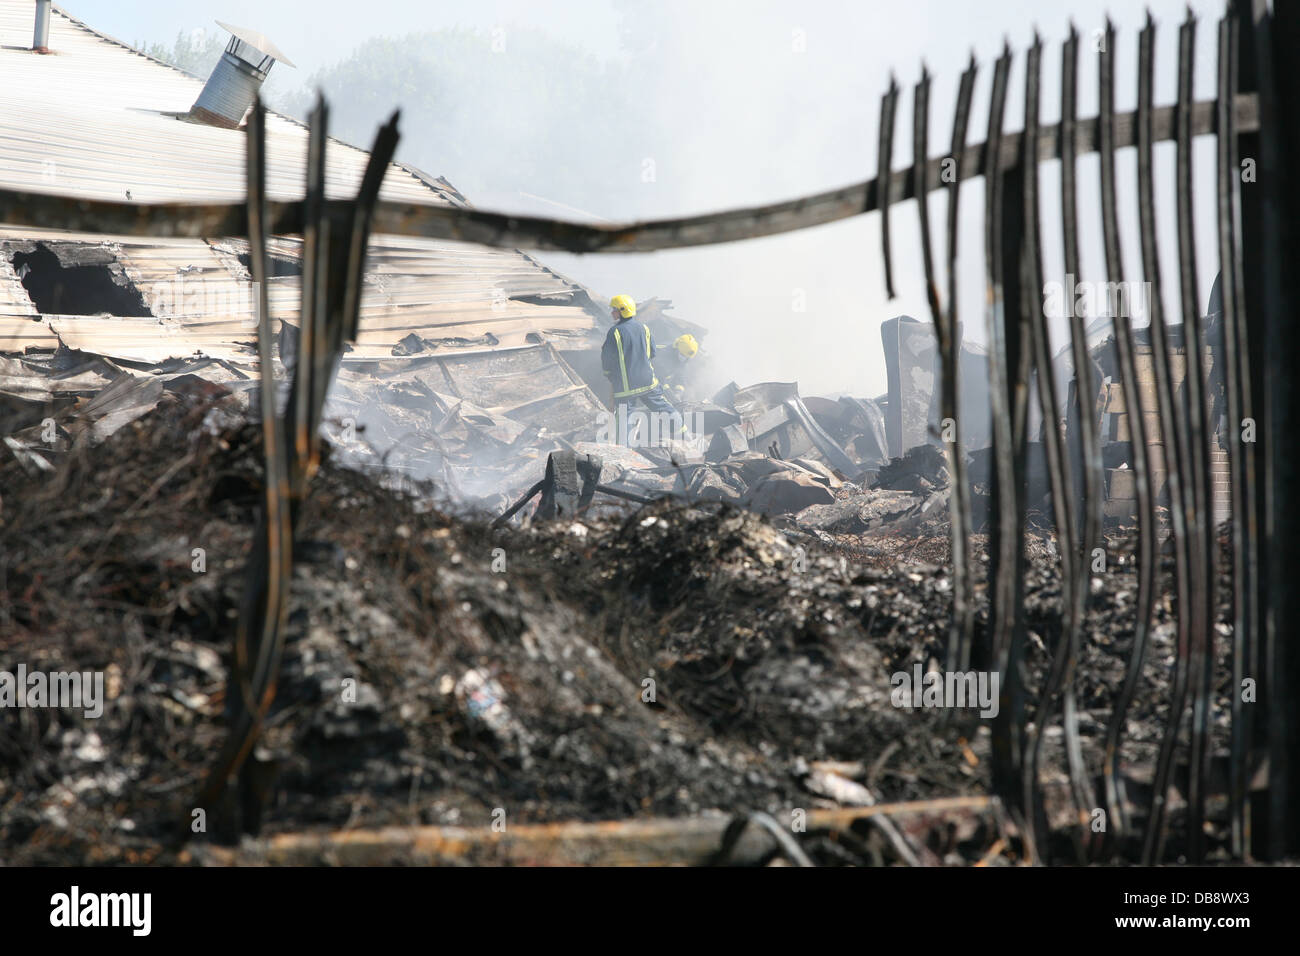 firefighters inspect a building that has been destroyed by fire Stock Photo